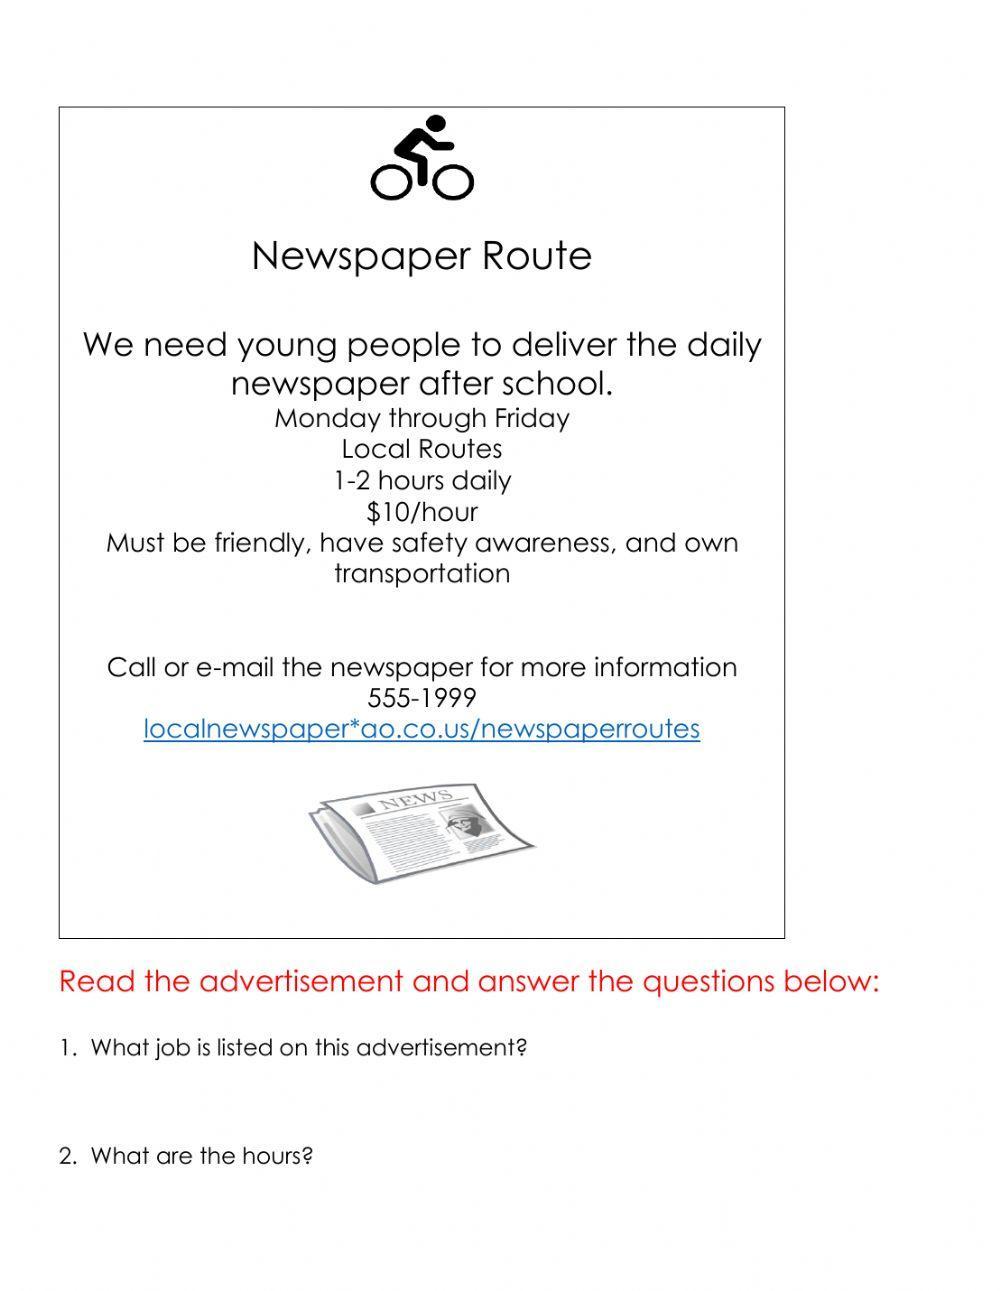 Reading a Help Wanted Advertisement (Newspaper Delivery Person)